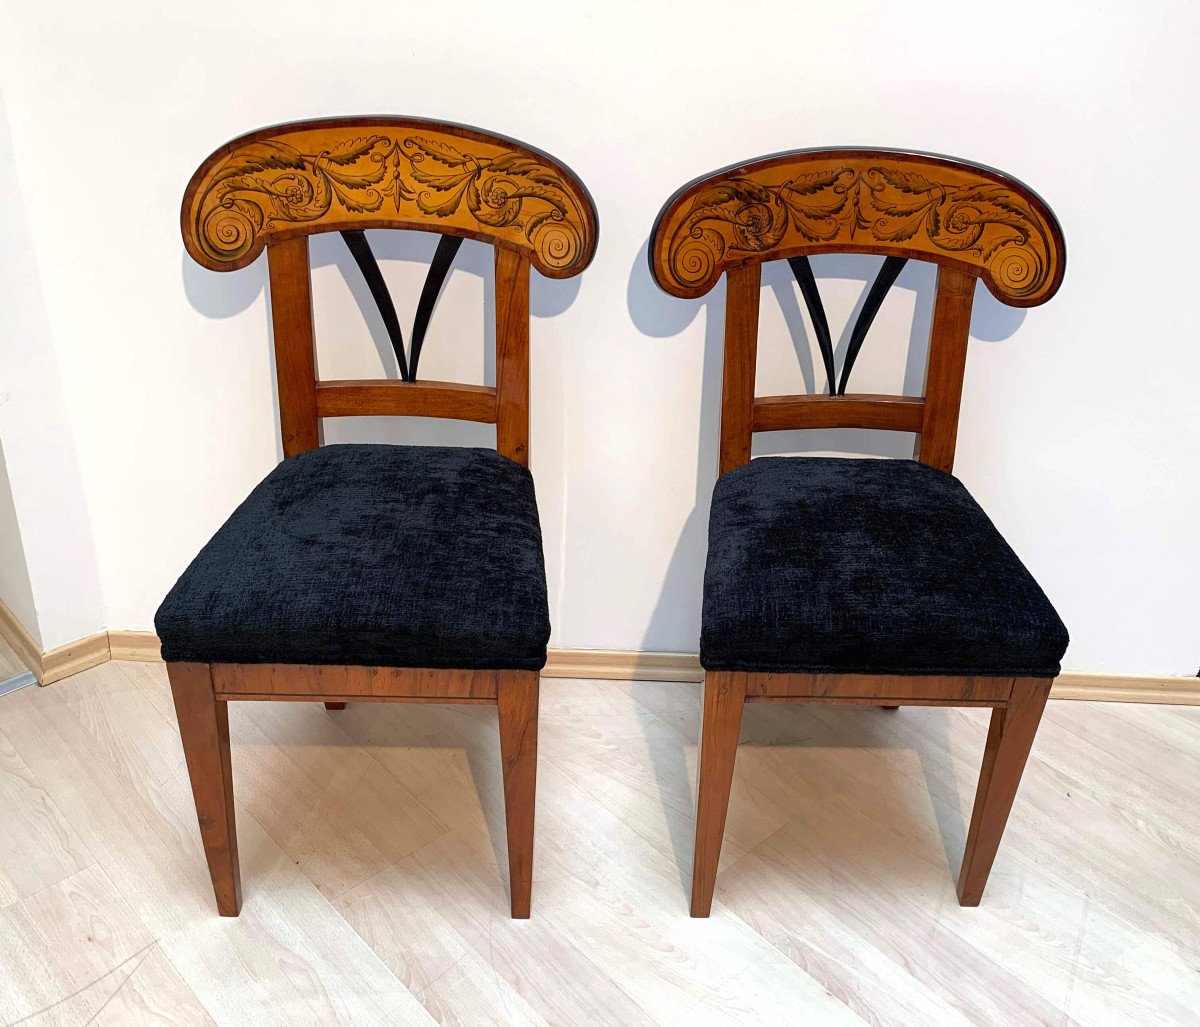 Exceptional Pair Of Biedermeier Shovel Chairs, Walnut, Maple With Ink, South Germany Circa 1830-photo-1